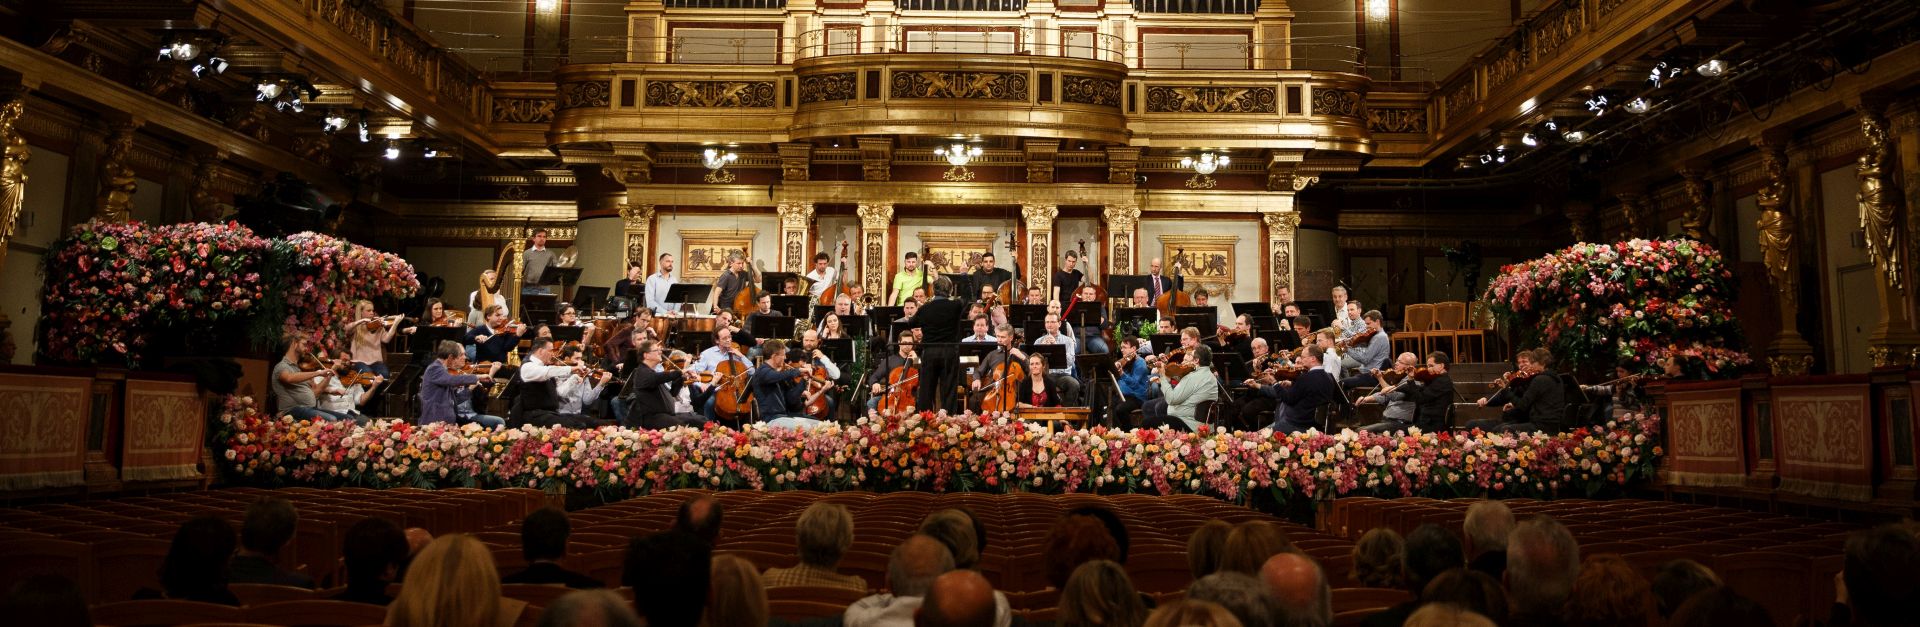 epa06409374 A general view of a rehearsal of the Vienna Philharmonic New Year's Concert 2018 at the Musikverein Concert Hall with Italian conductor Riccardo Muti  (C) in Vienna, Austria, 29 December 2017. The traditional concert is staged every year on 01 January.  EPA/FLORIAN WIESER